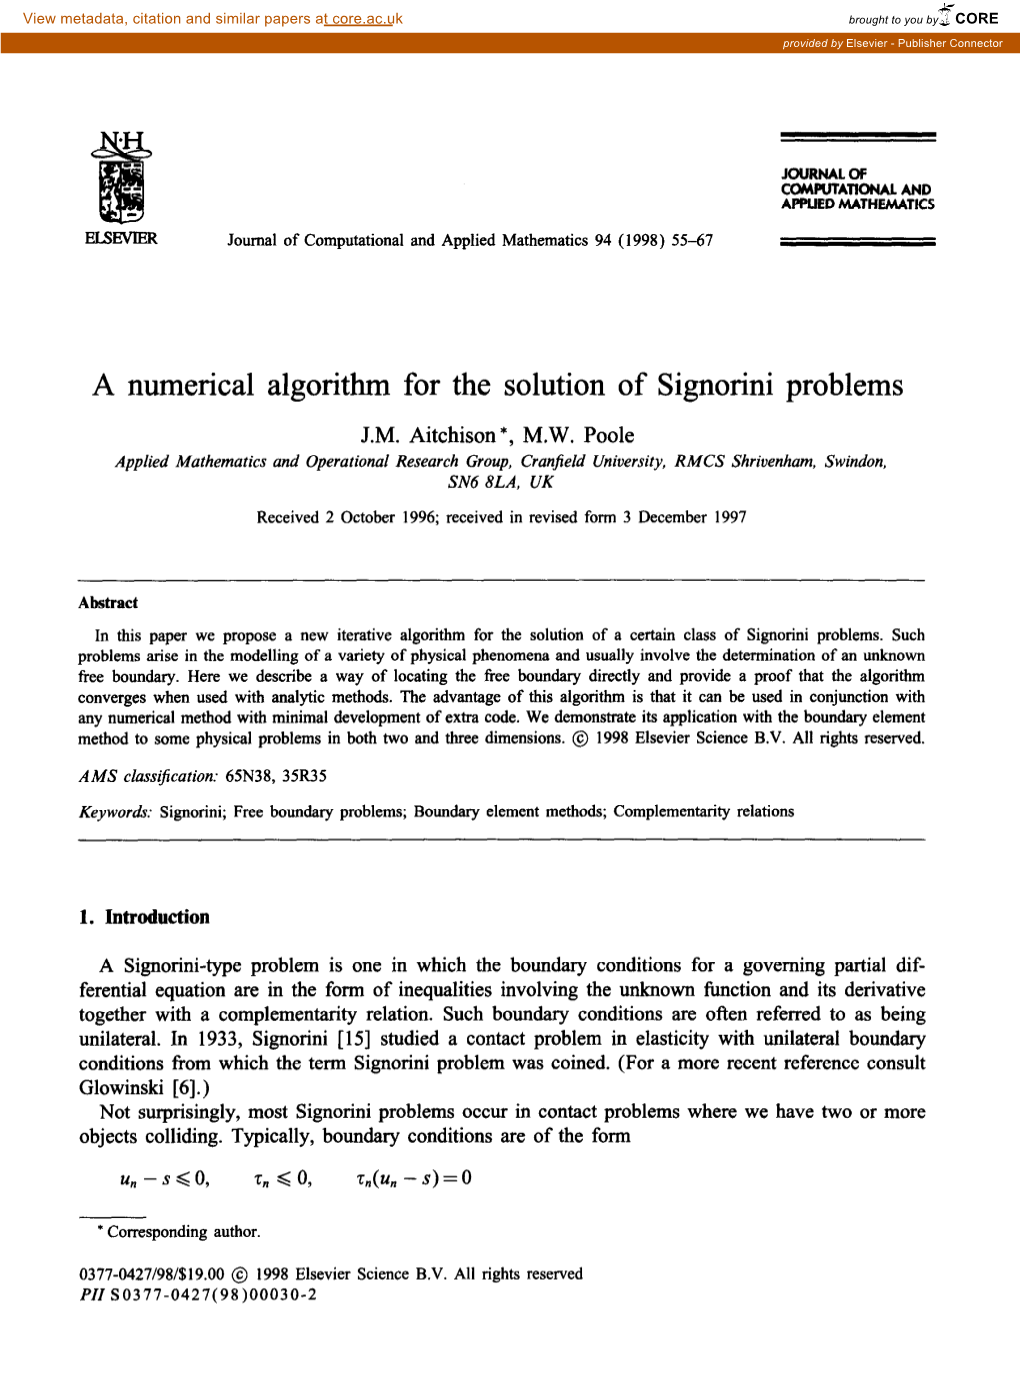 A Numerical Algorithm for the Solution of Signorini Problems